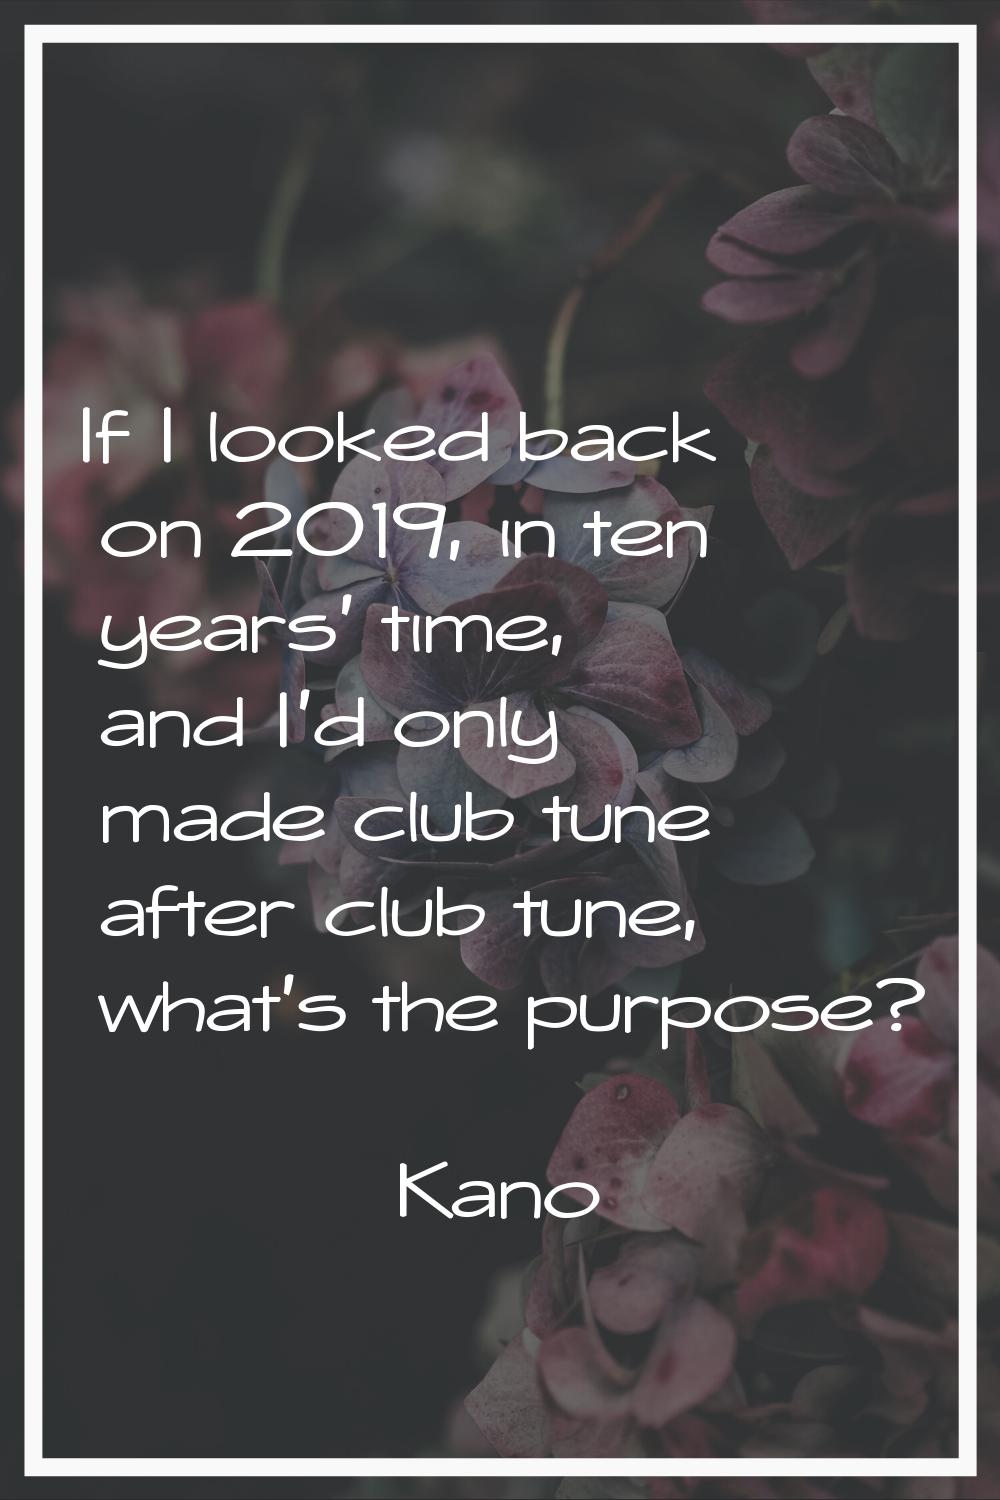 If I looked back on 2019, in ten years' time, and I'd only made club tune after club tune, what's t